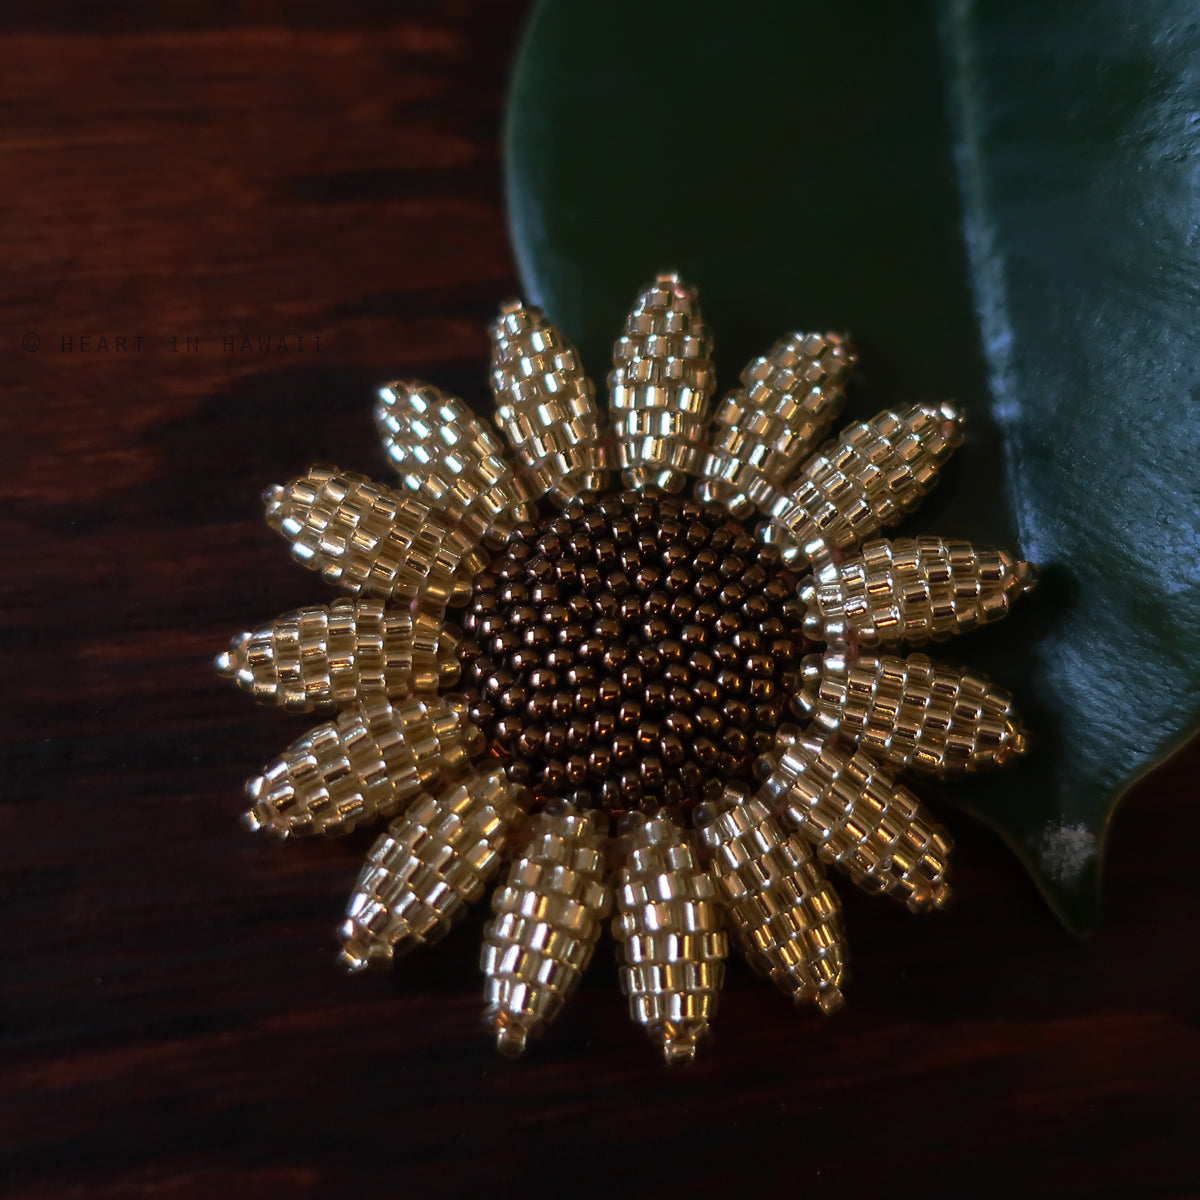 Heart in Hawaii Beaded Sunflower Brooch - Sparkly Gold